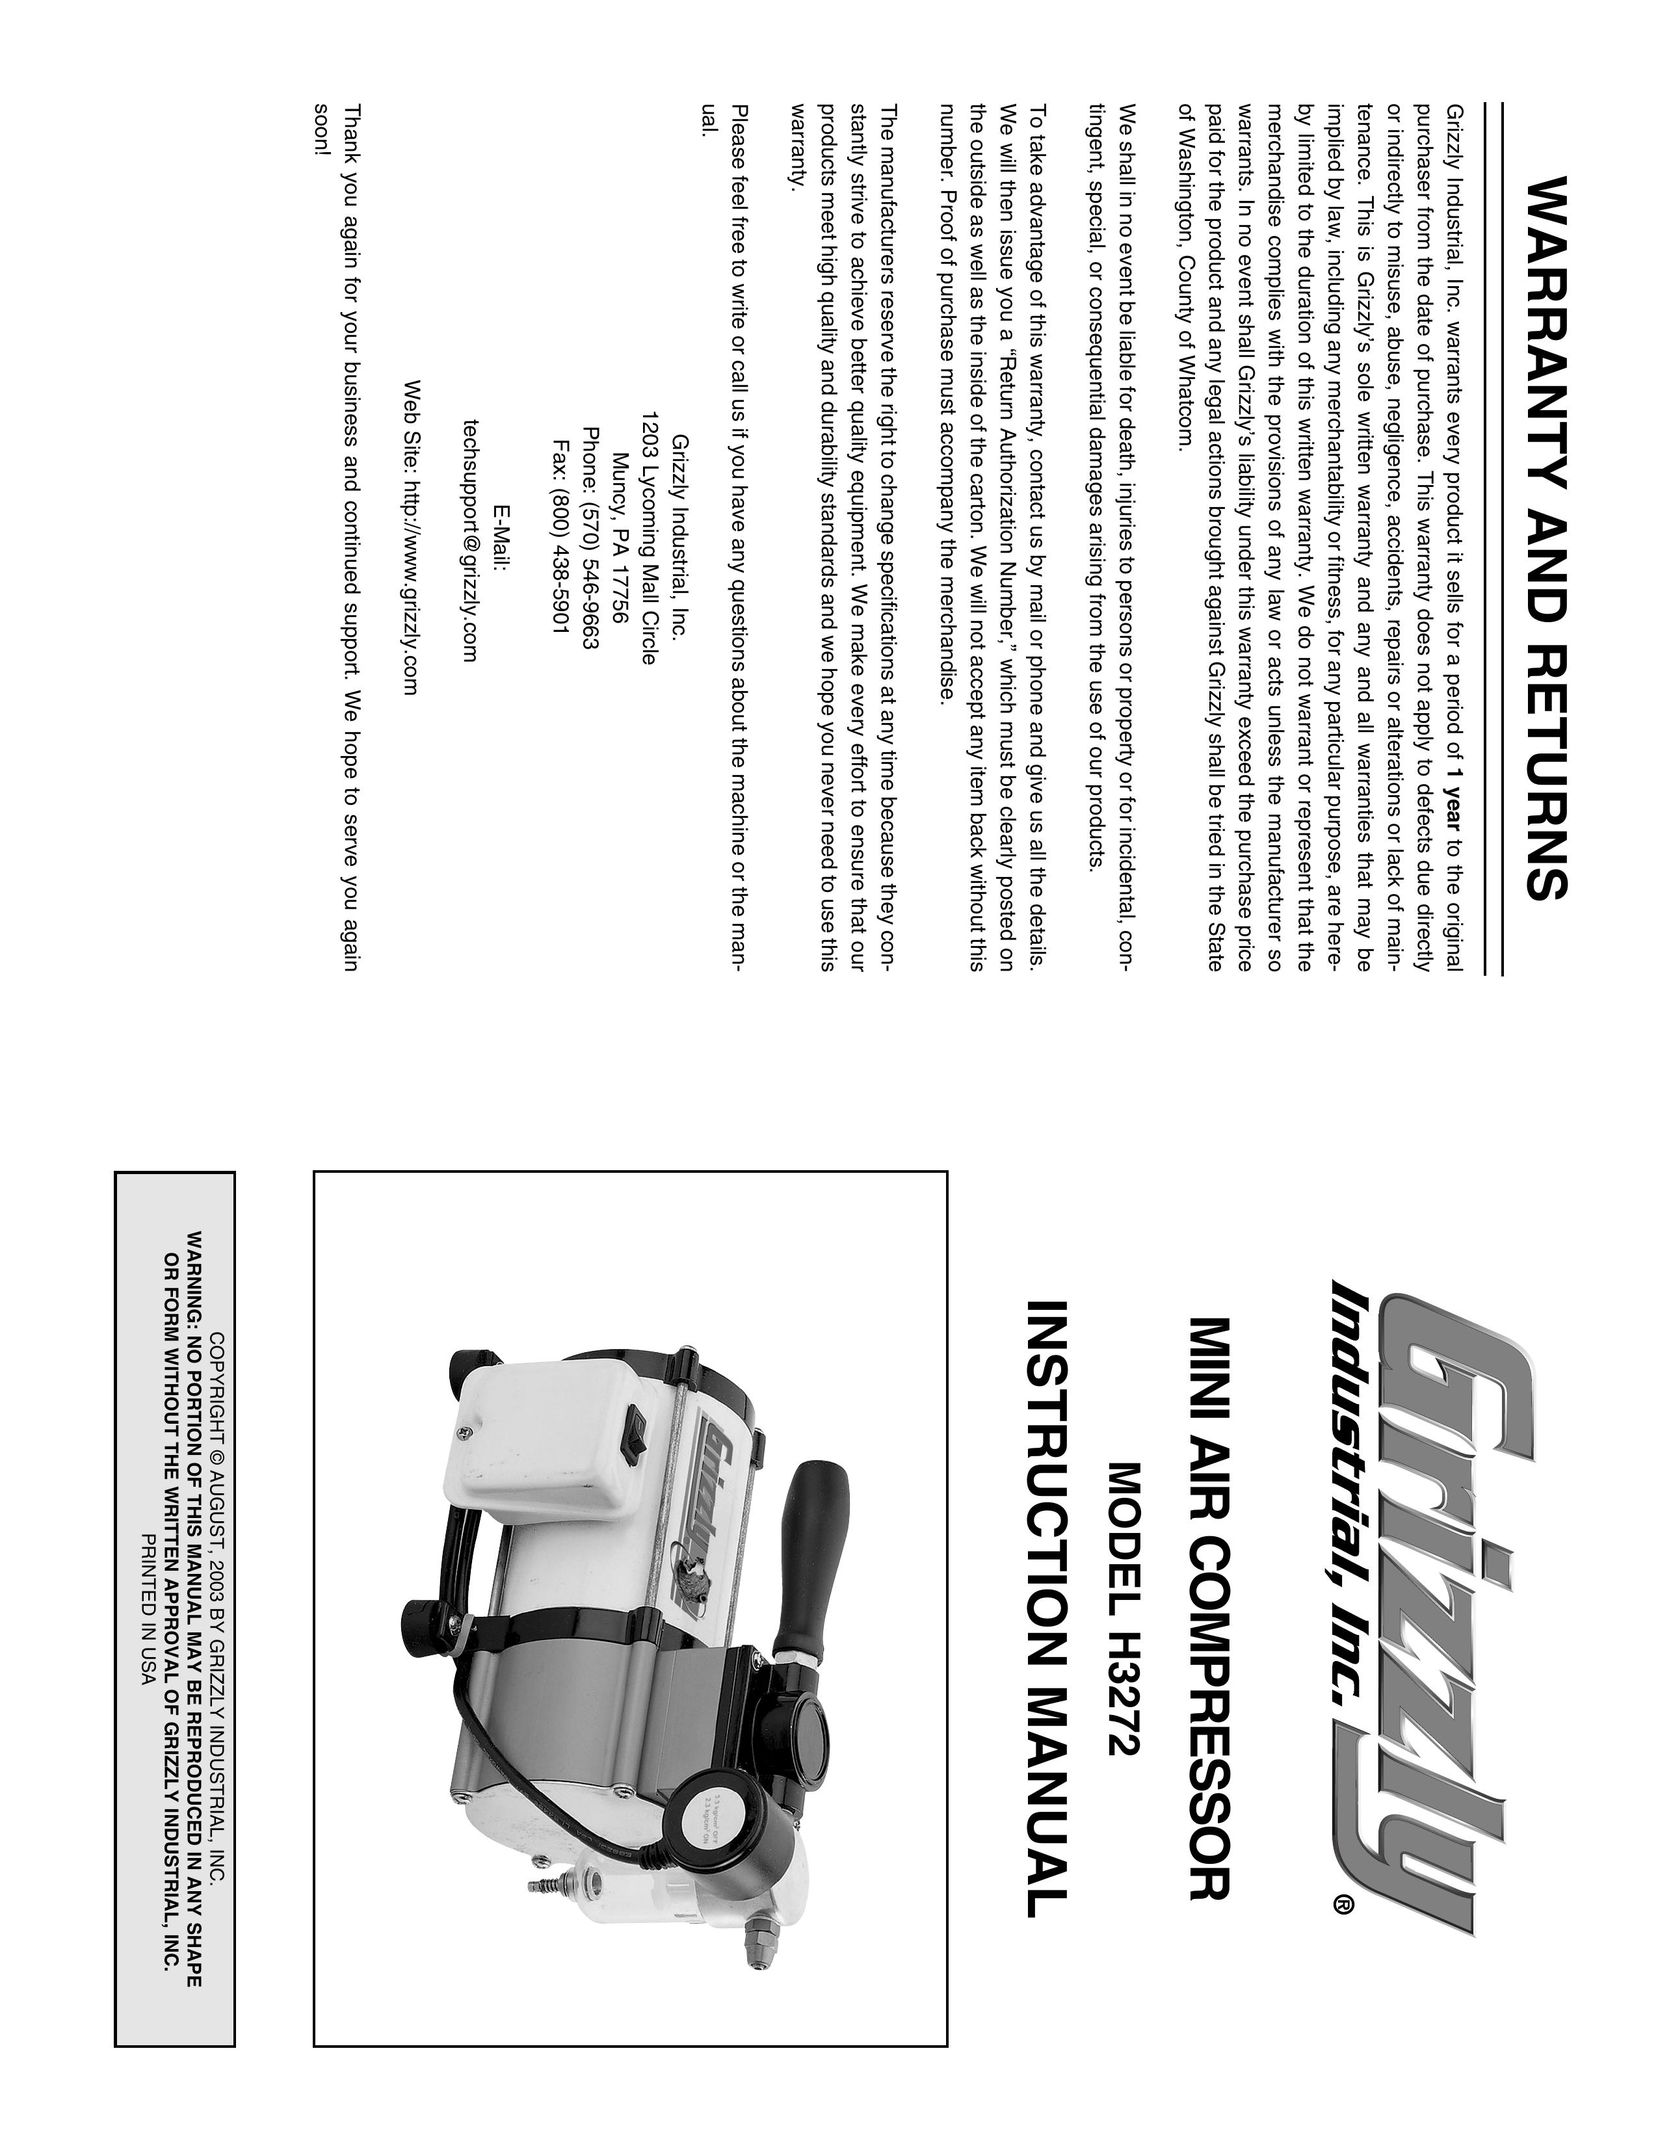 Grizzly H3272 Air Compressor User Manual